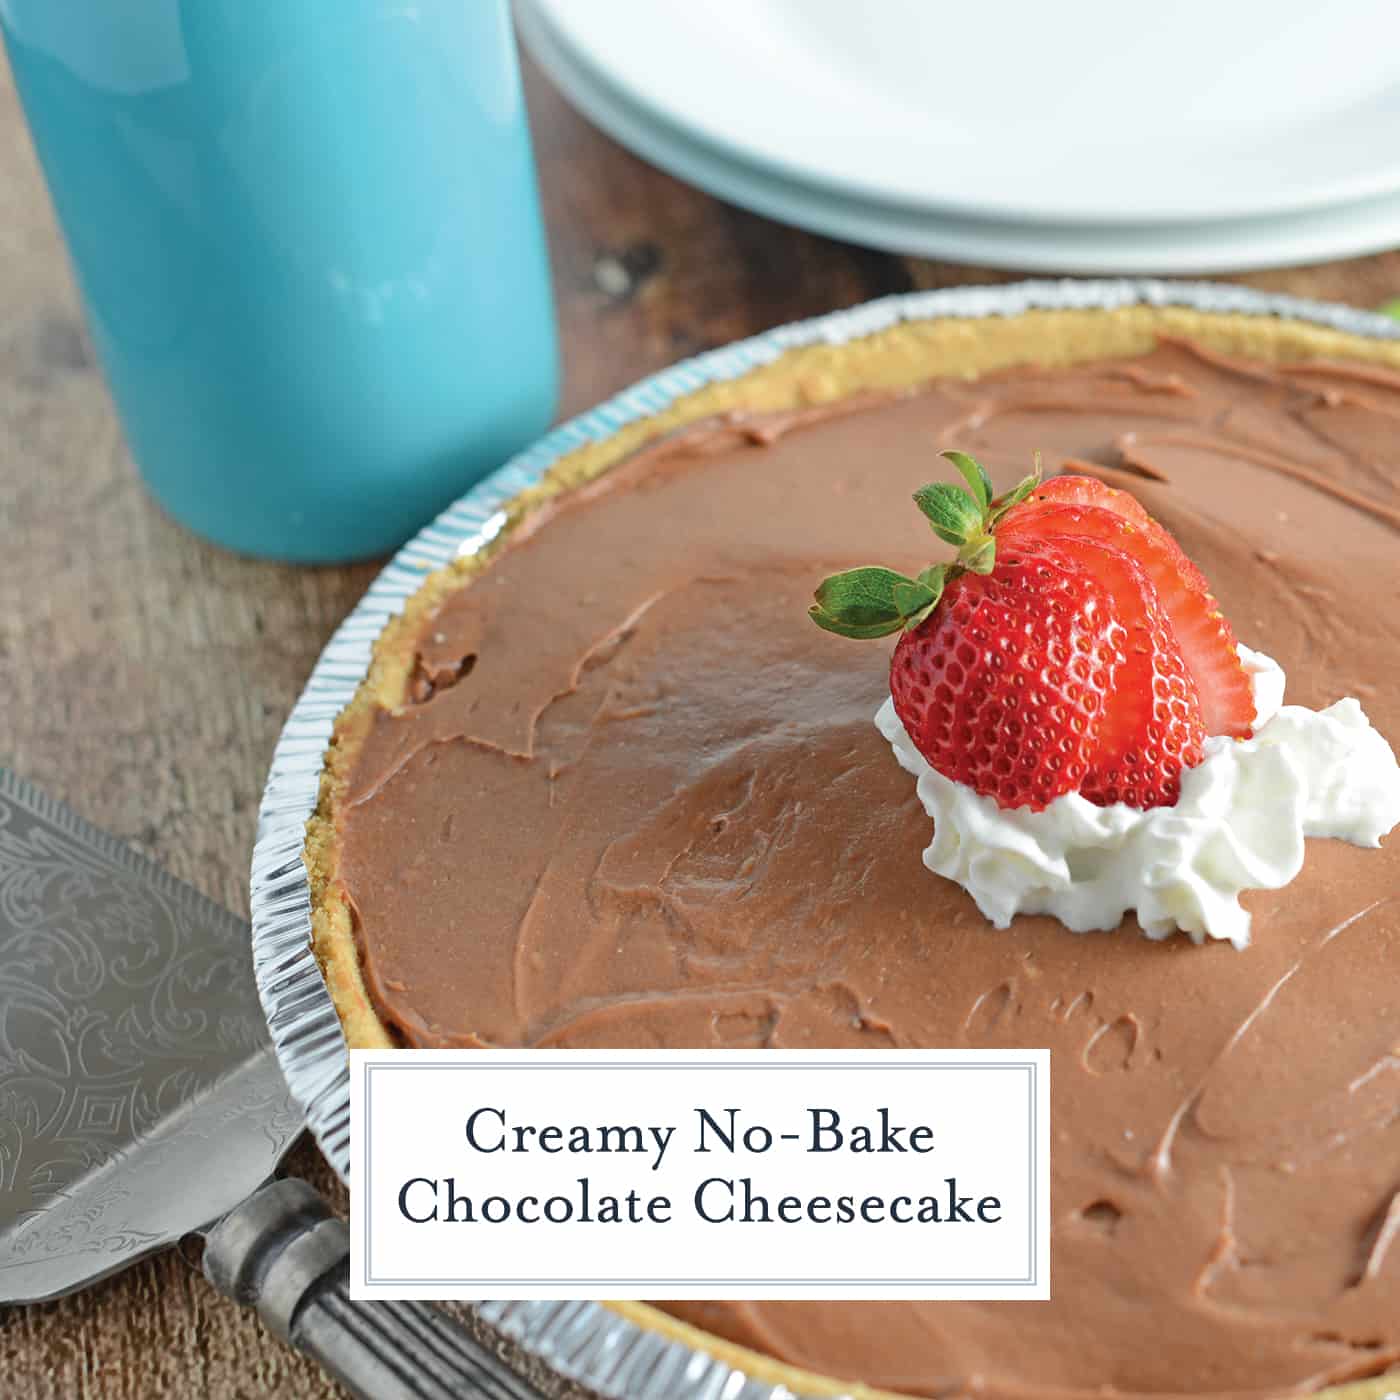 Using a premade crust, the ultra creamy No-Bake Chocolate Cheesecake uses just 5 ingredients and takes minutes to prepare. Make ahead and take to your next party! #nobakedesserts #chocolatecheesecake #nobakecheesecake www.savoryexperiments.com